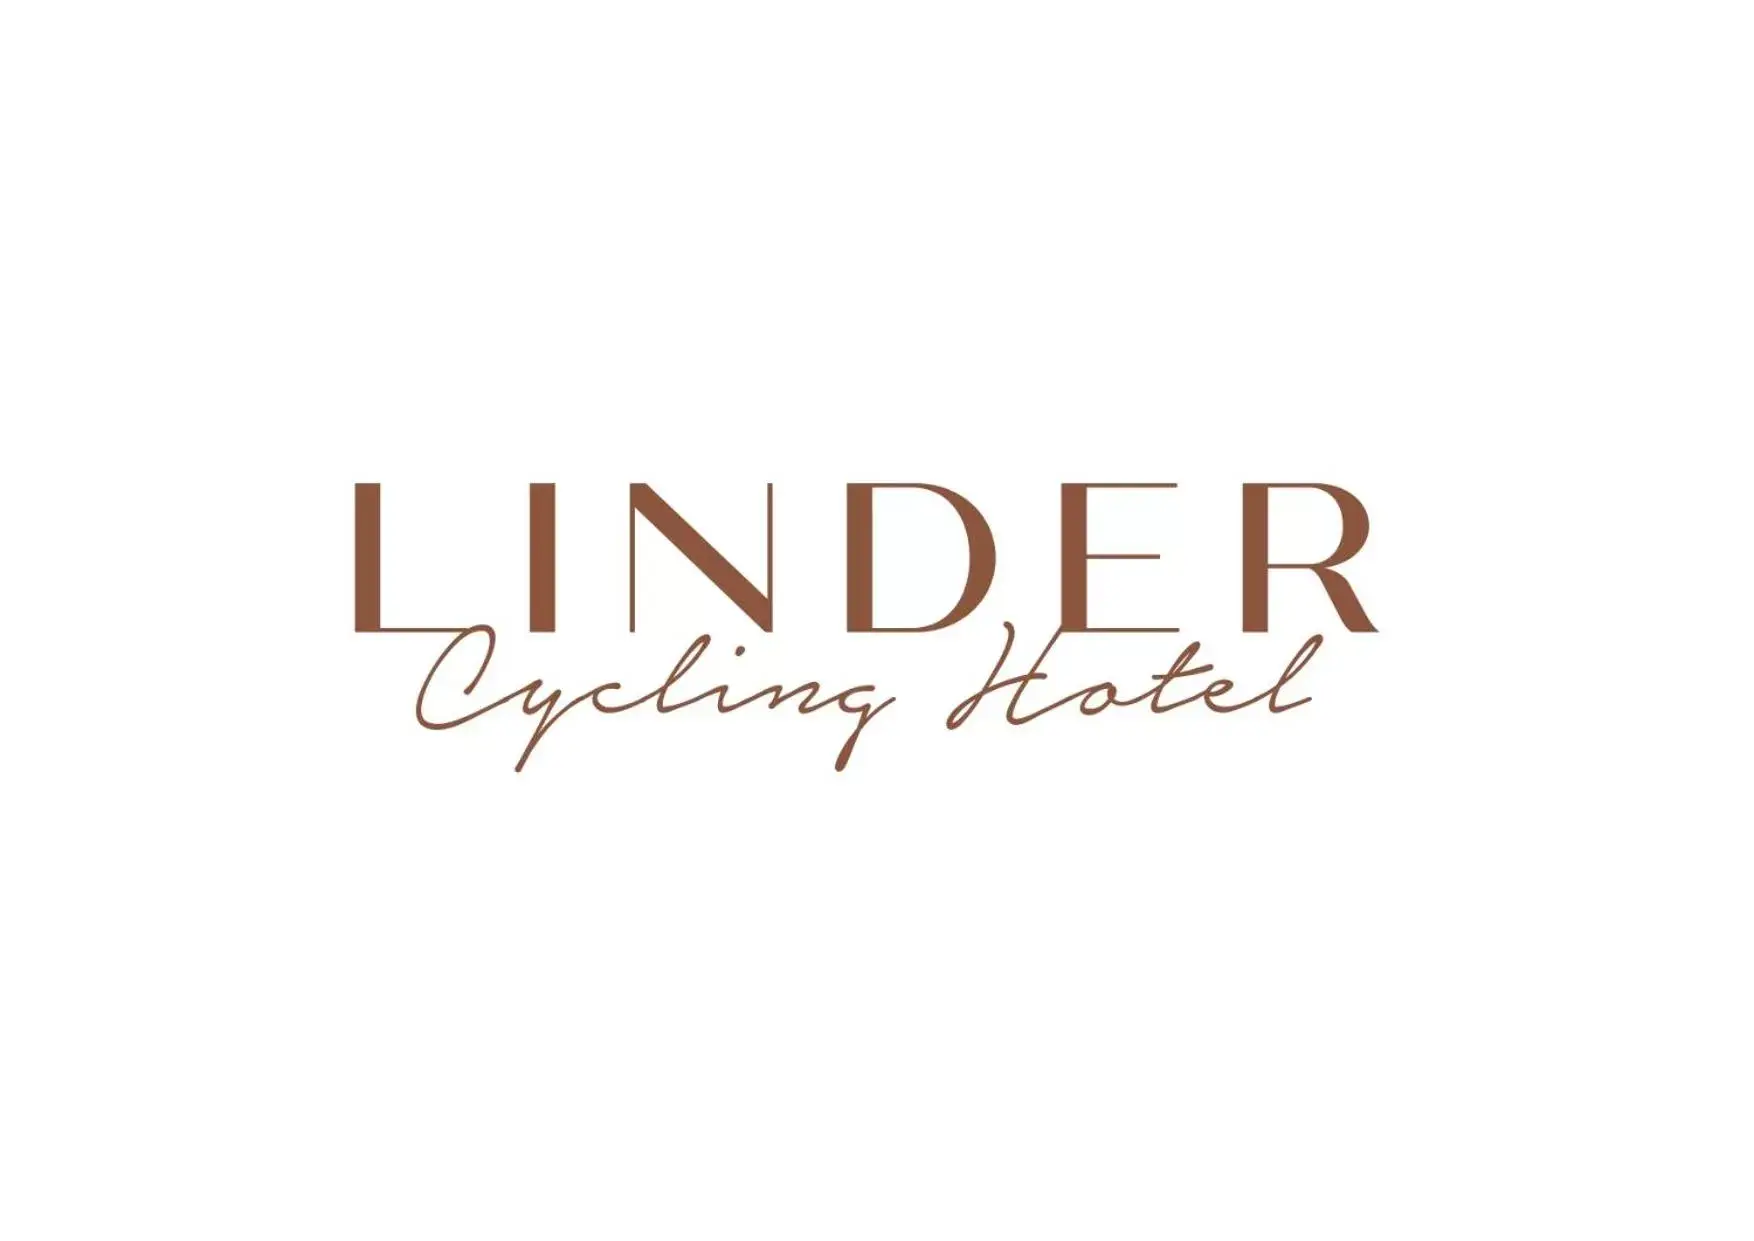 Property logo or sign, Property Logo/Sign in Linder Cycling Hotel